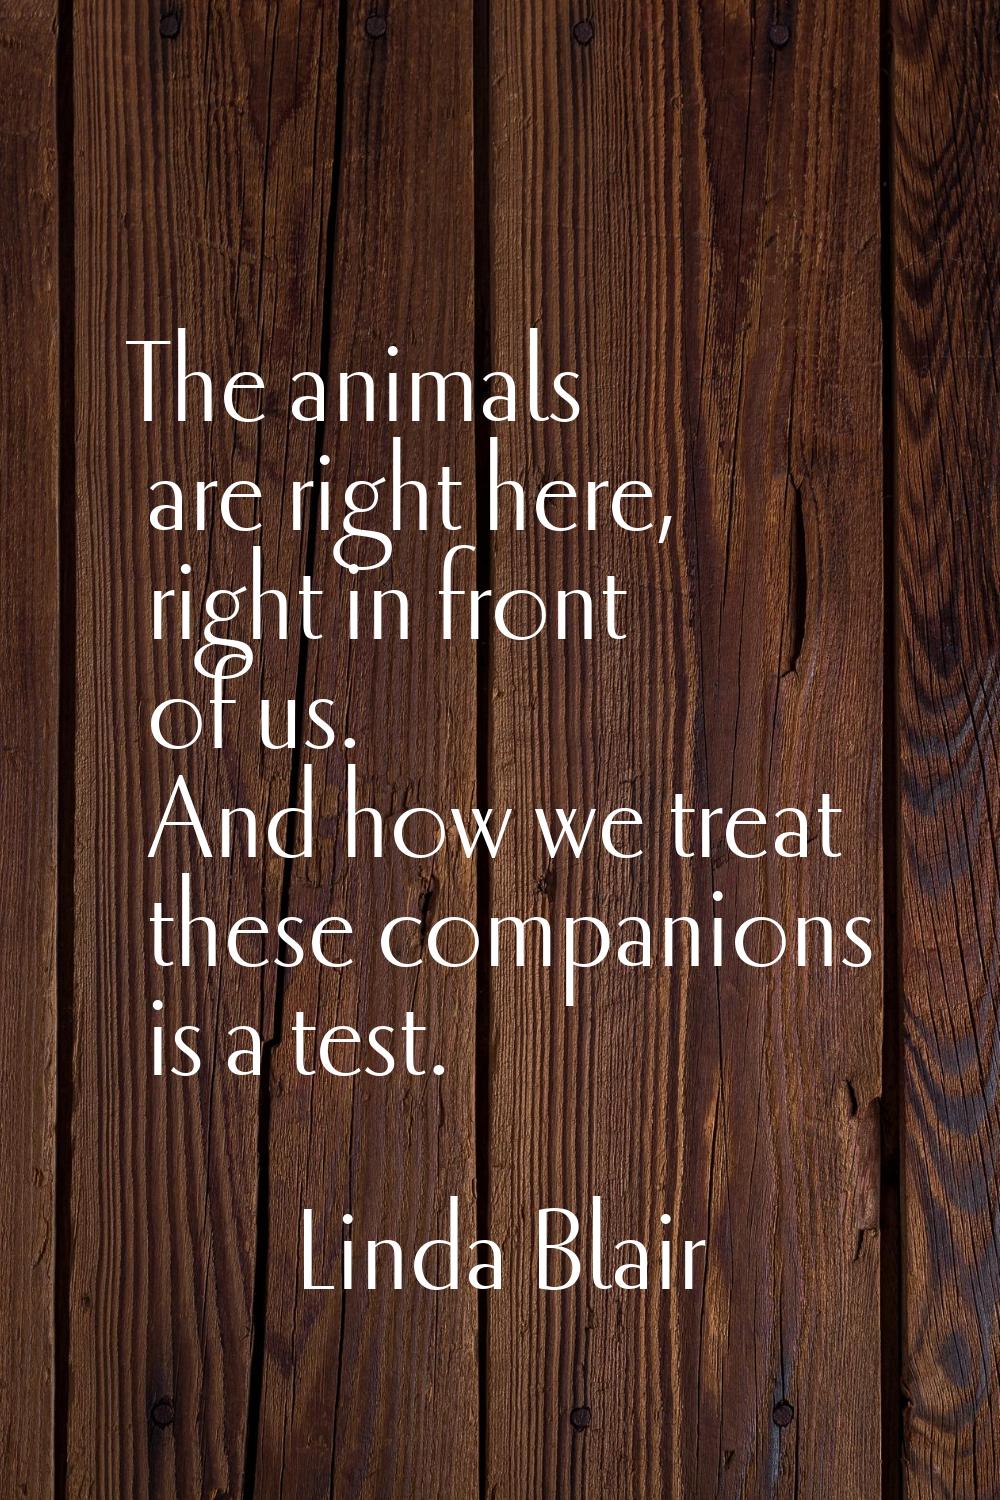 The animals are right here, right in front of us. And how we treat these companions is a test.